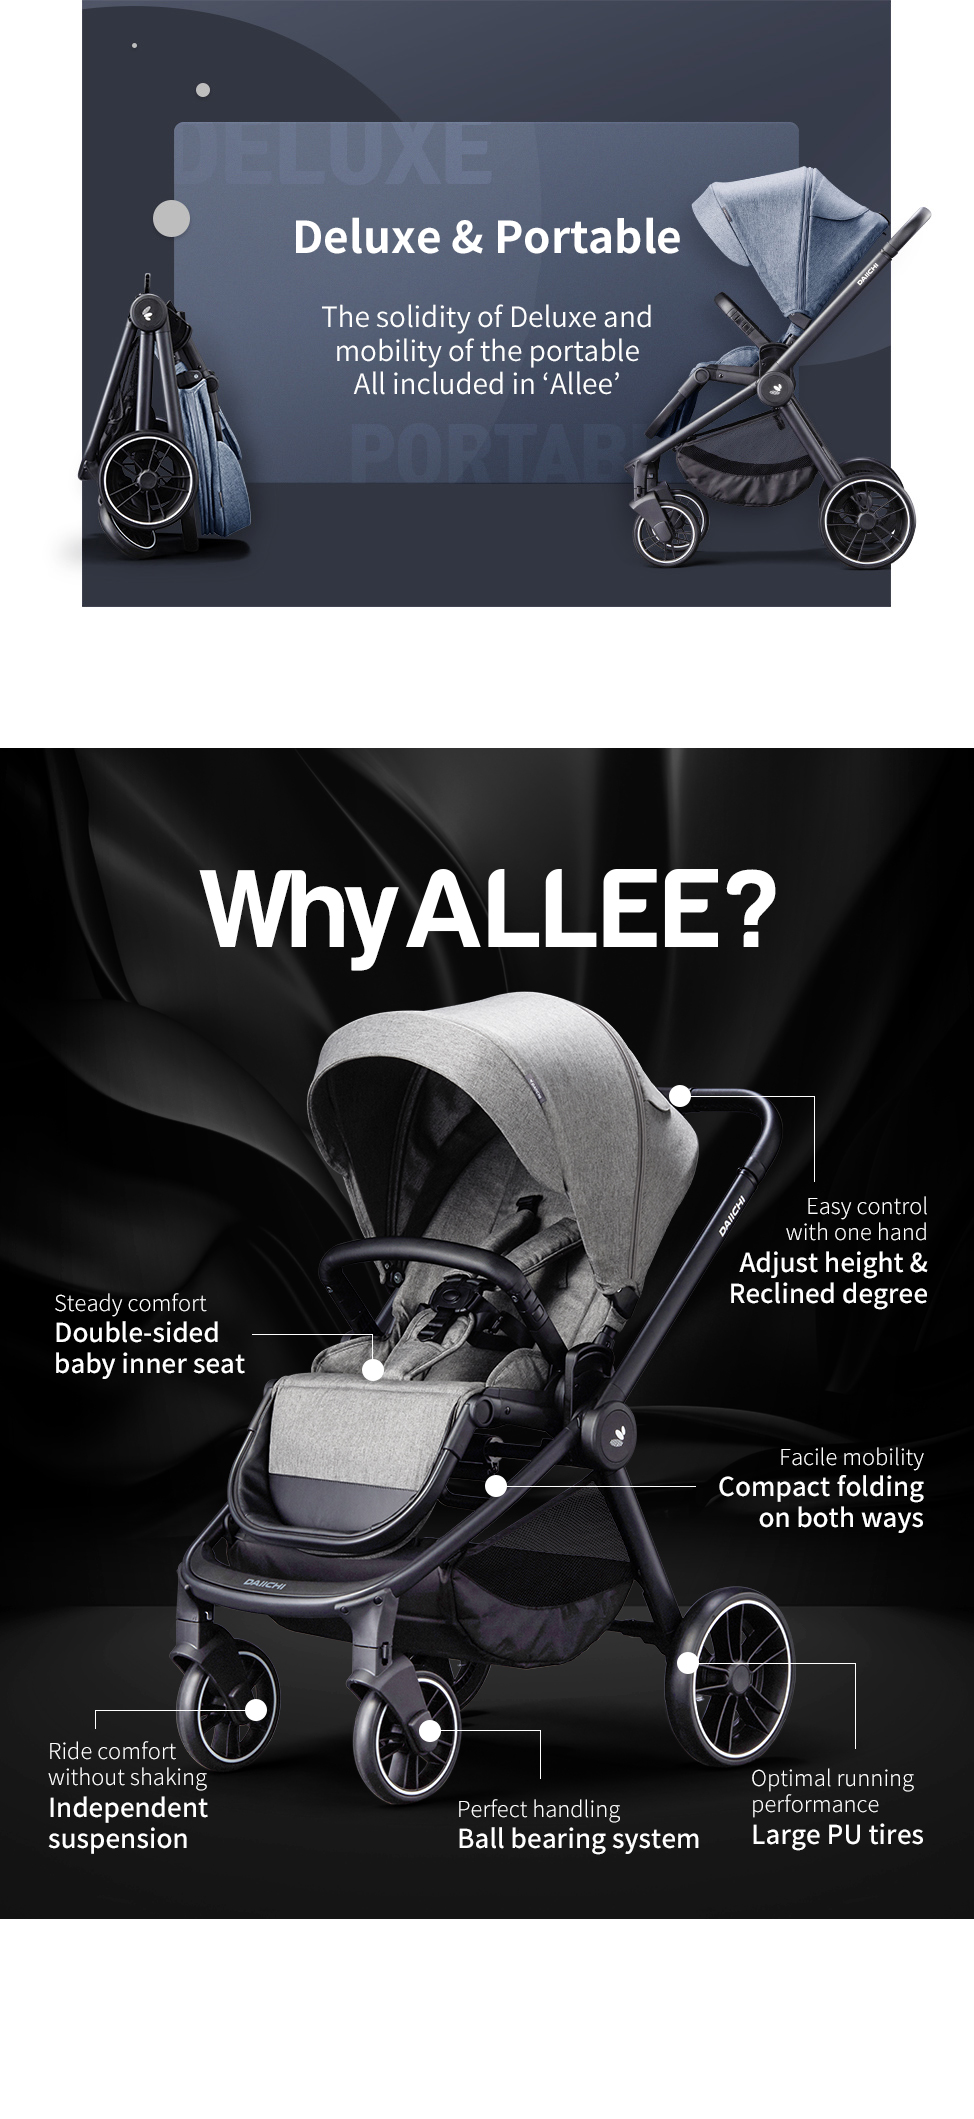 The solidity of Deluxe and mobility of the portable All included in ‘Allee’